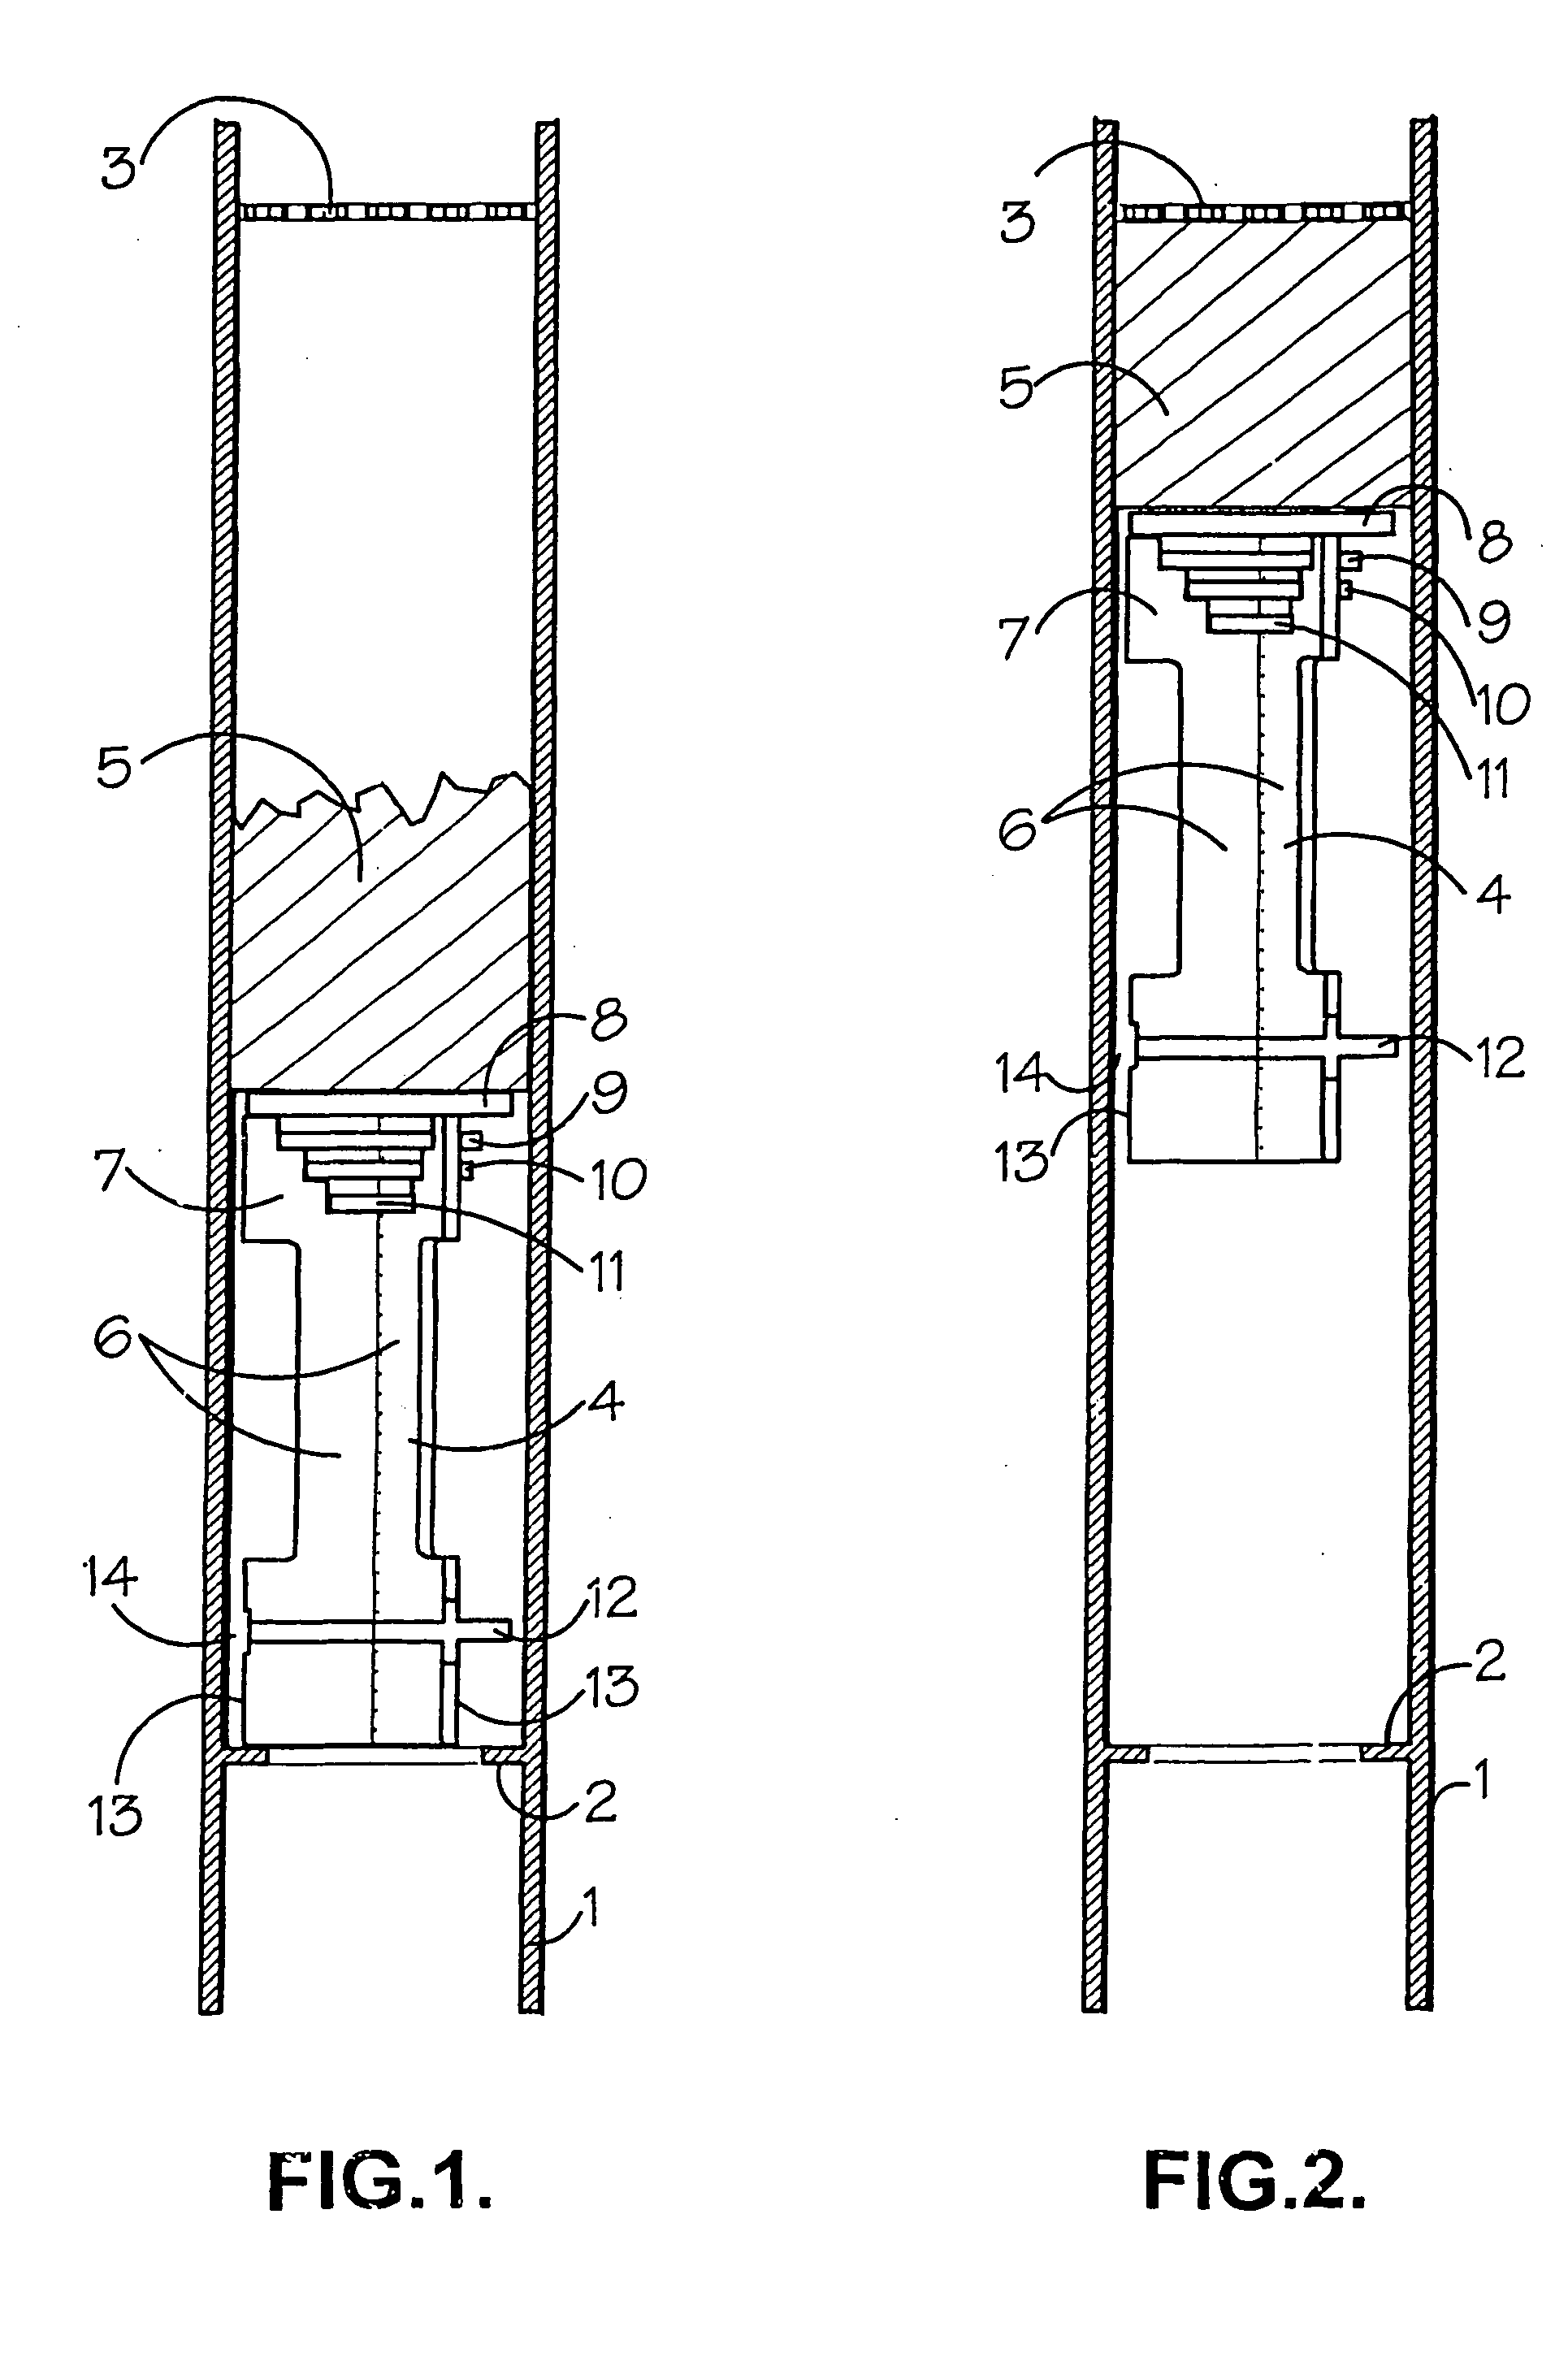 Process and apparatus for loading a particulate solid into a vertical tube